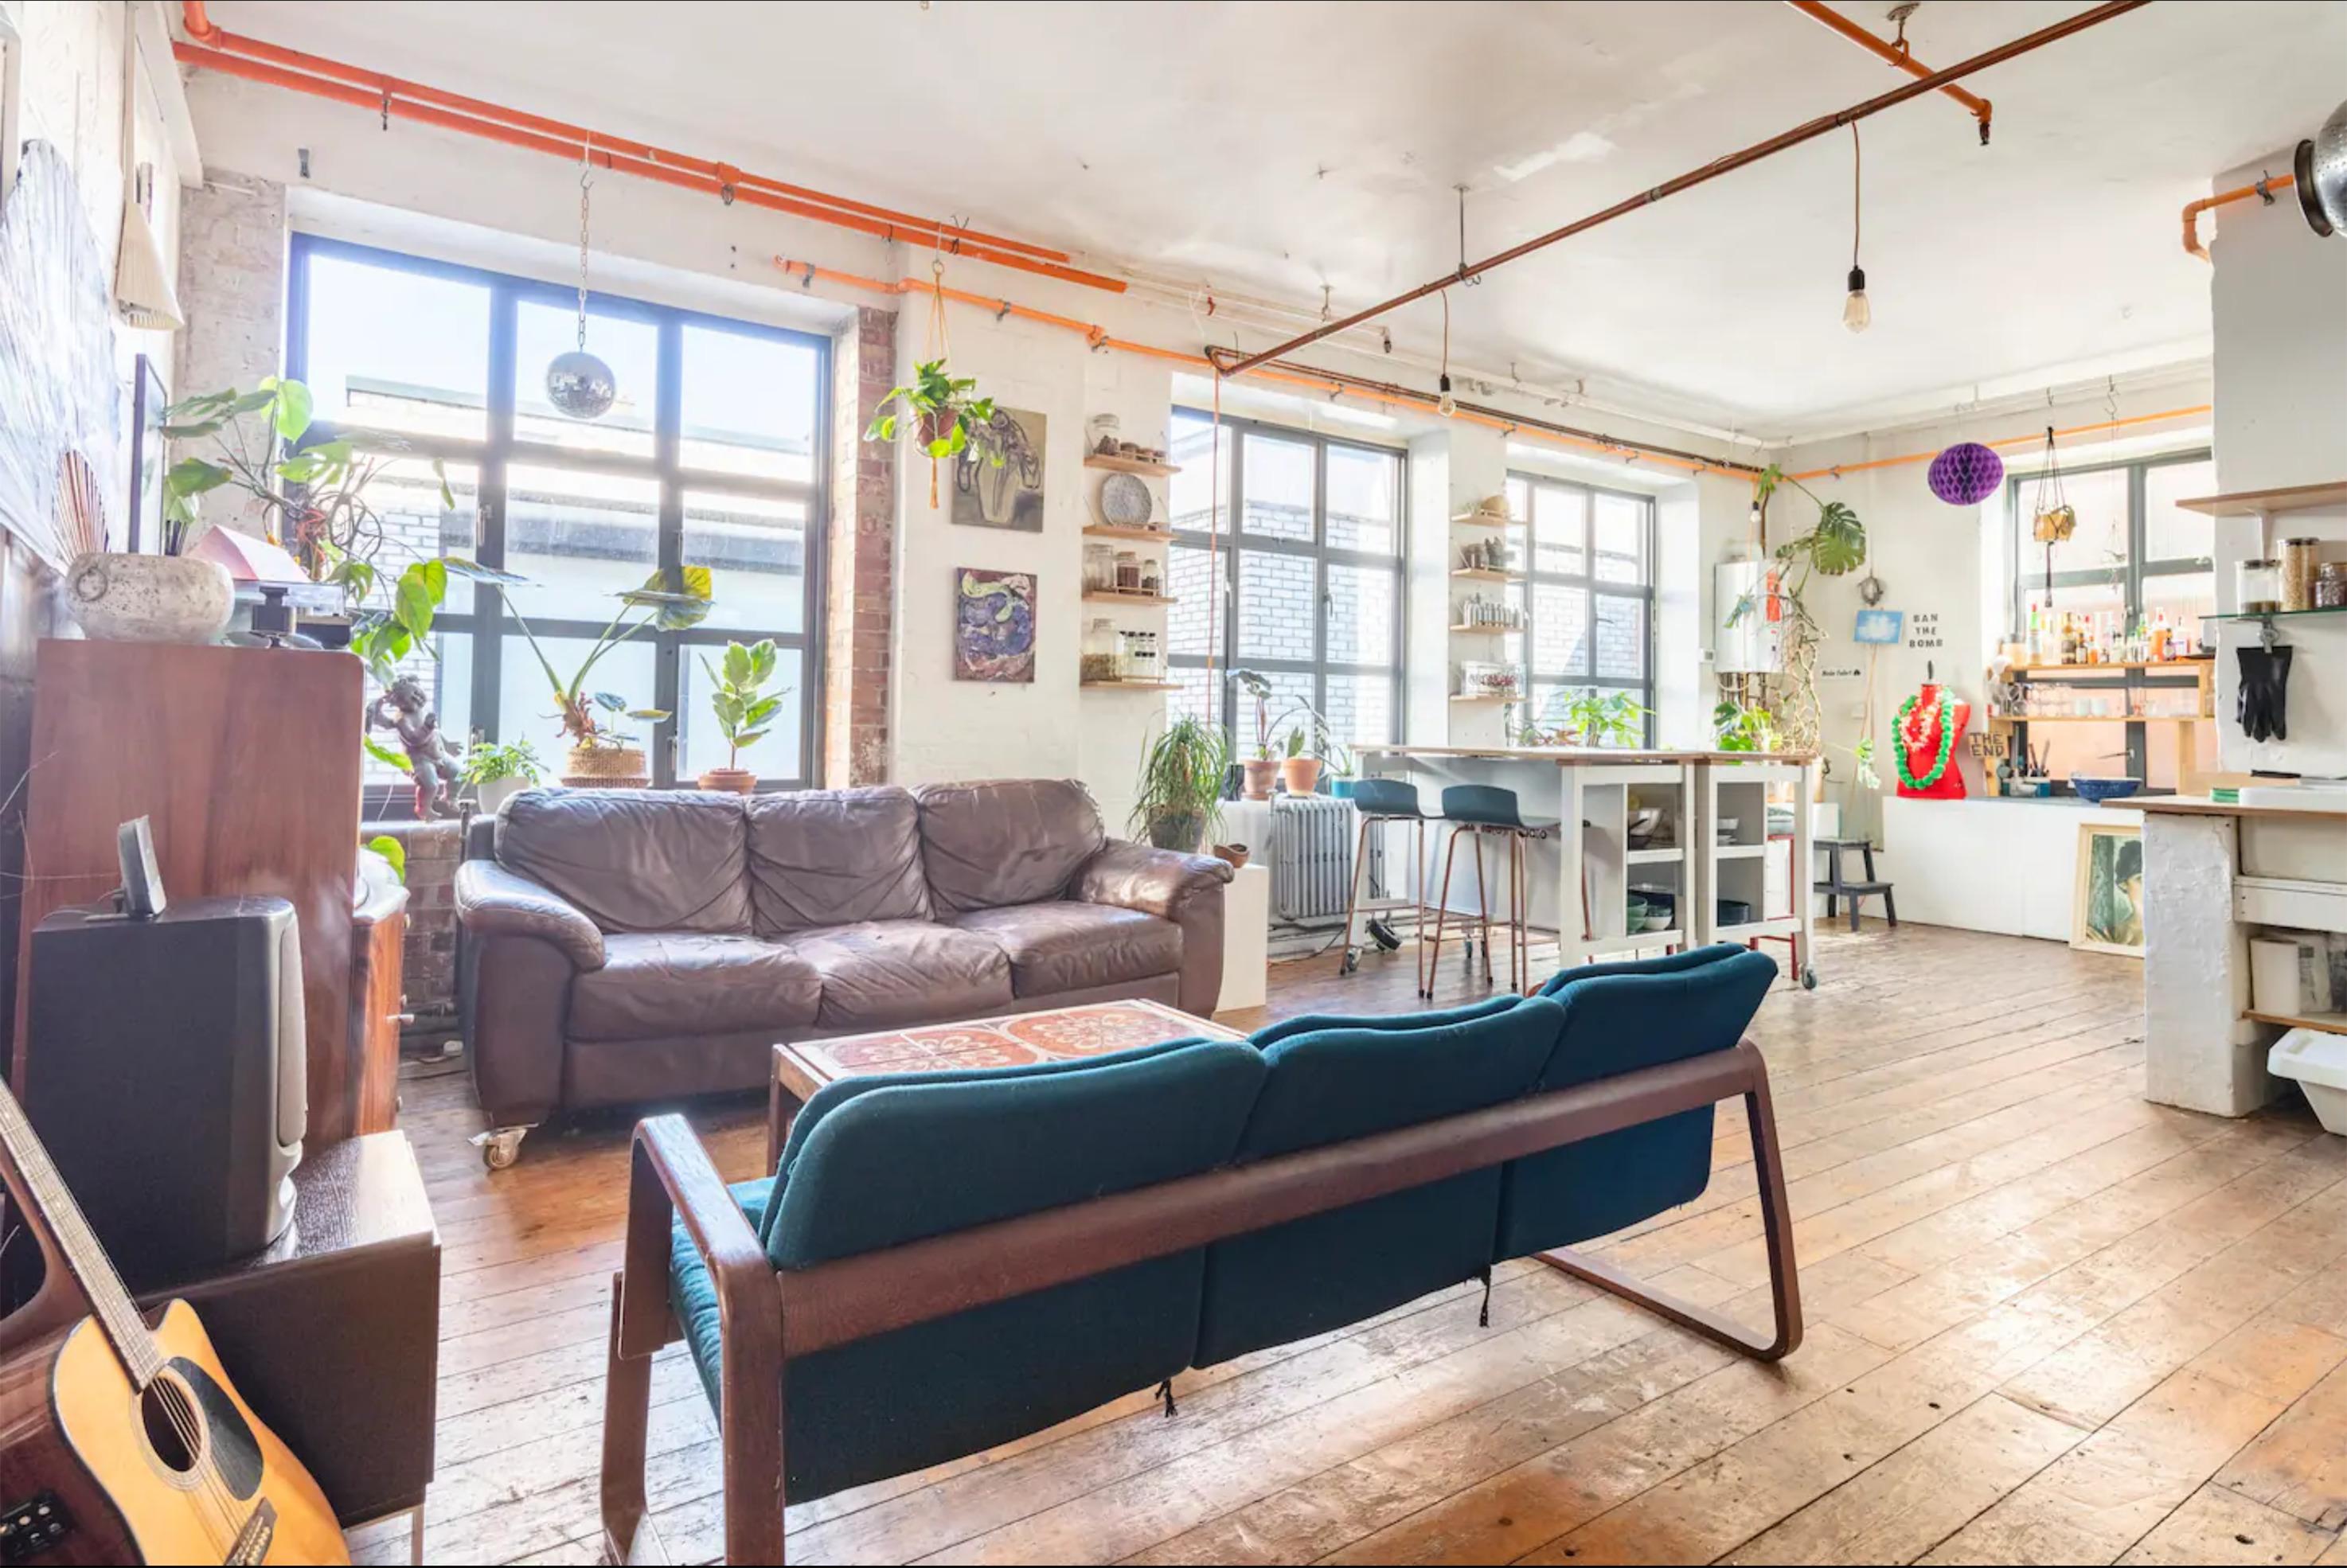 Full Apartment, Artist Warehouse In Hackney - Photoshoot / Interview / Video / Food Photography photo #6